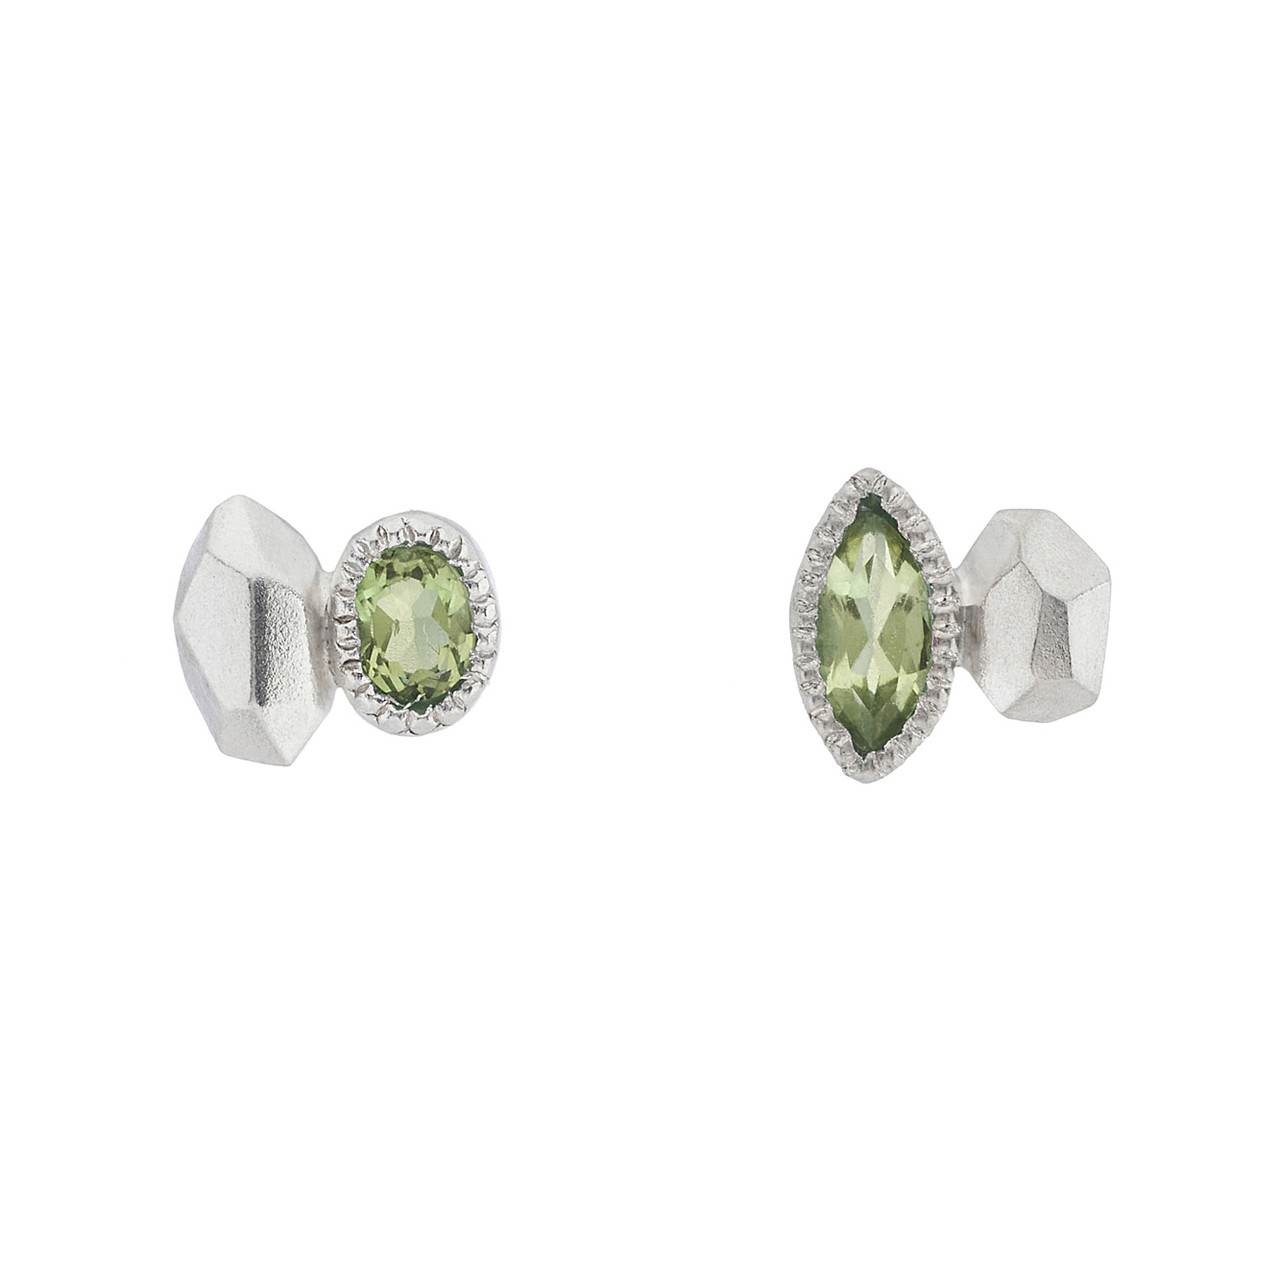 Gea Marquise Irregular Studs in Silver with Peridot, Maria Manola, tomfoolery